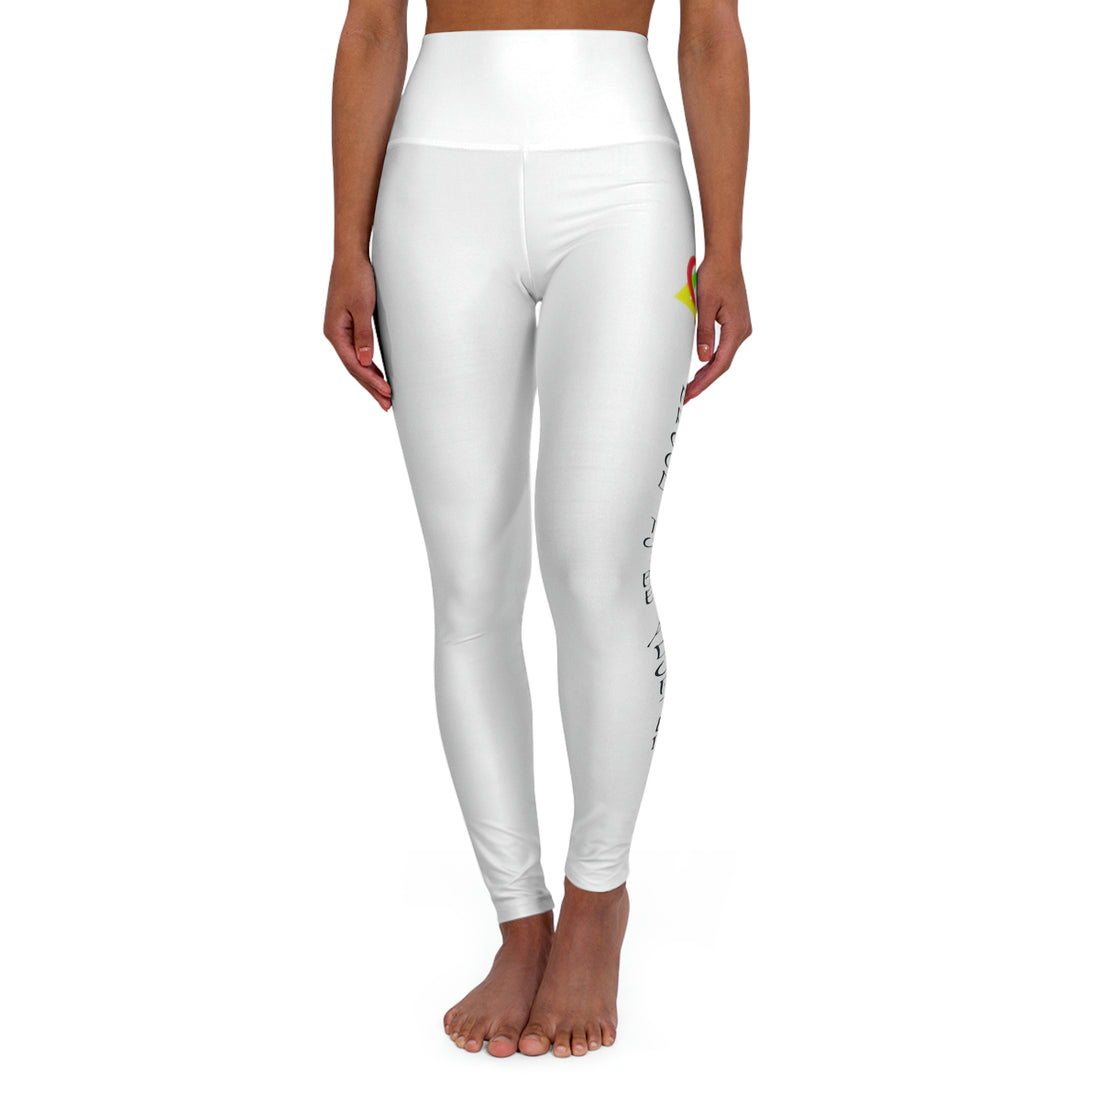 Proud to be Adopted - White High Waisted Yoga Leggings